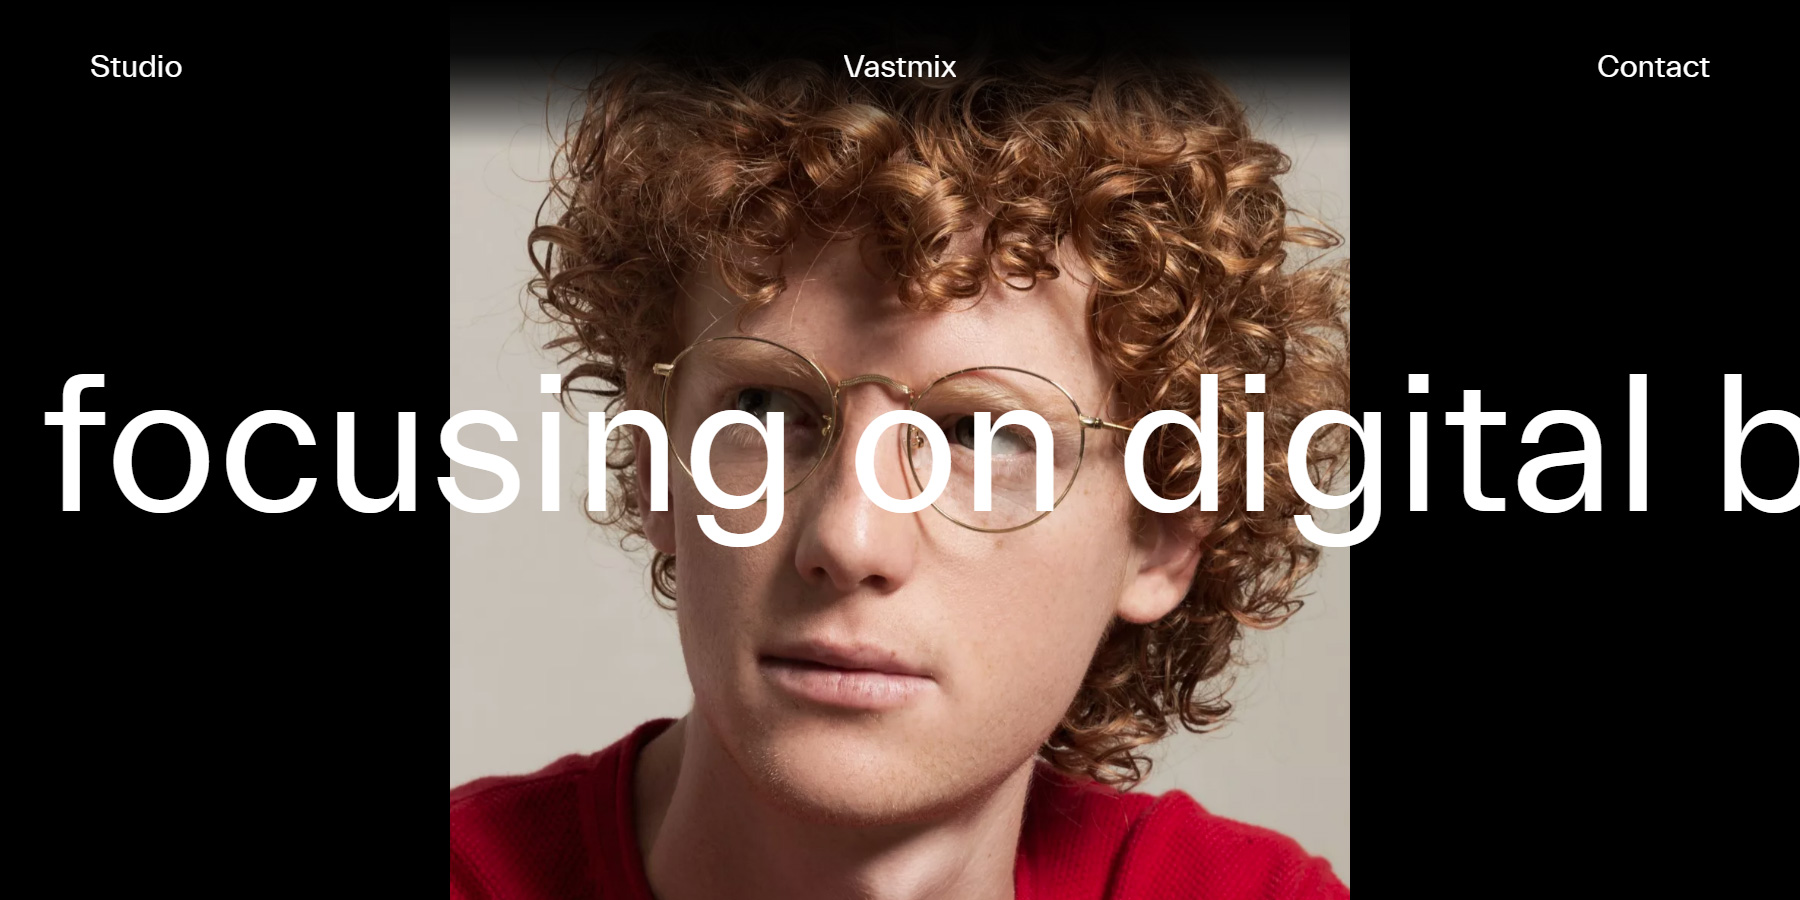 Vastmix - Website of the Day